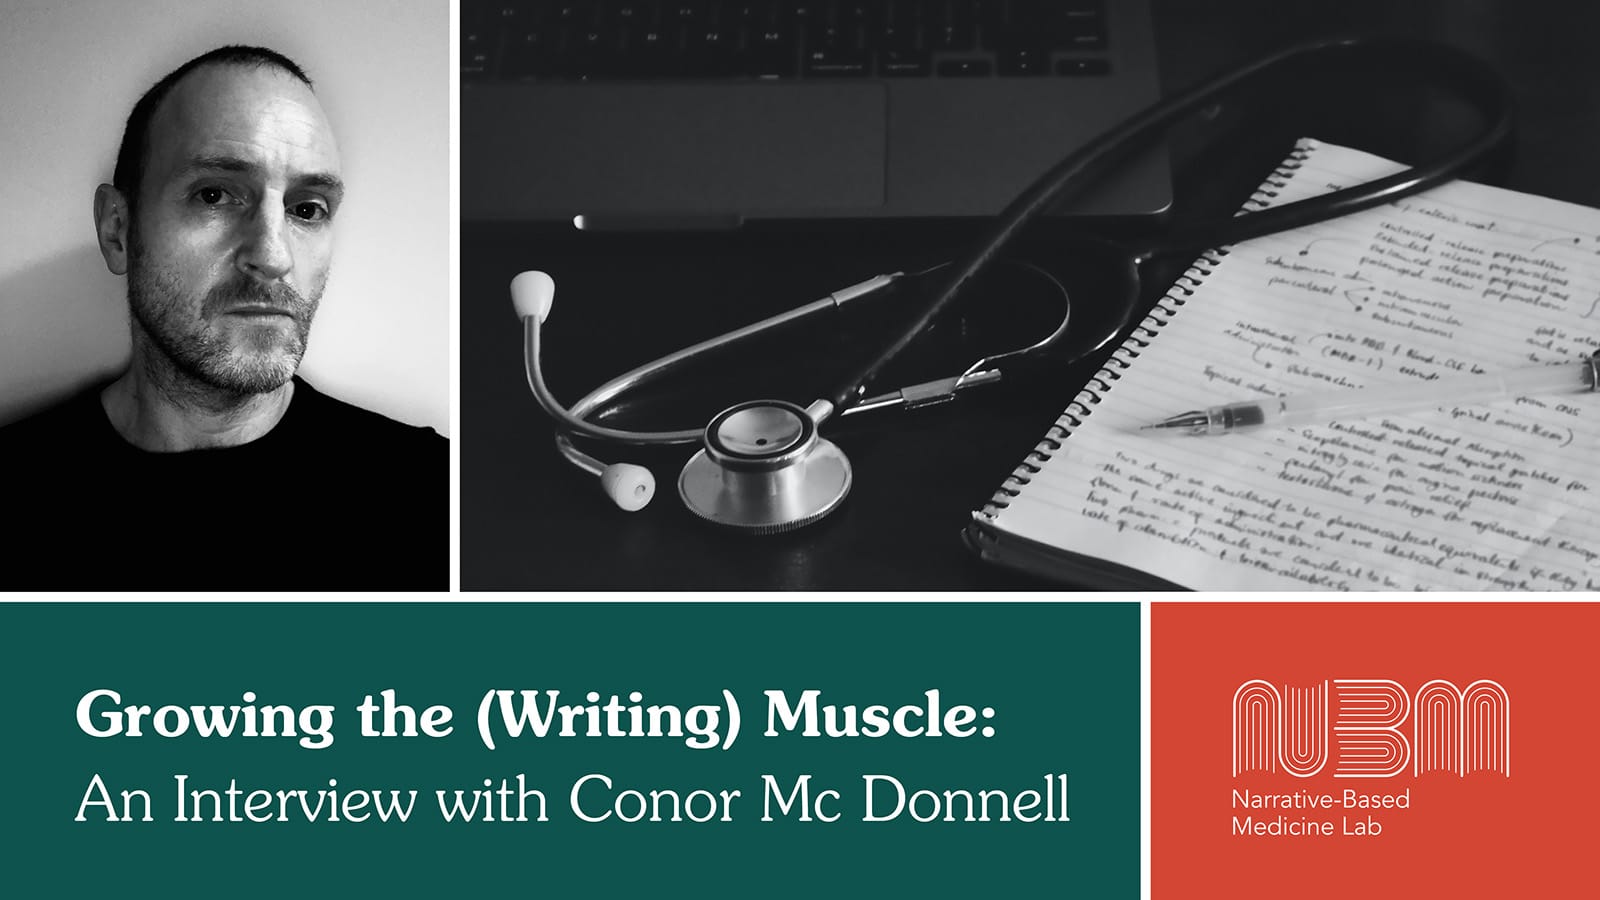 Growing the (Writing) Muscle: An Interview with Conor Mc Donnell